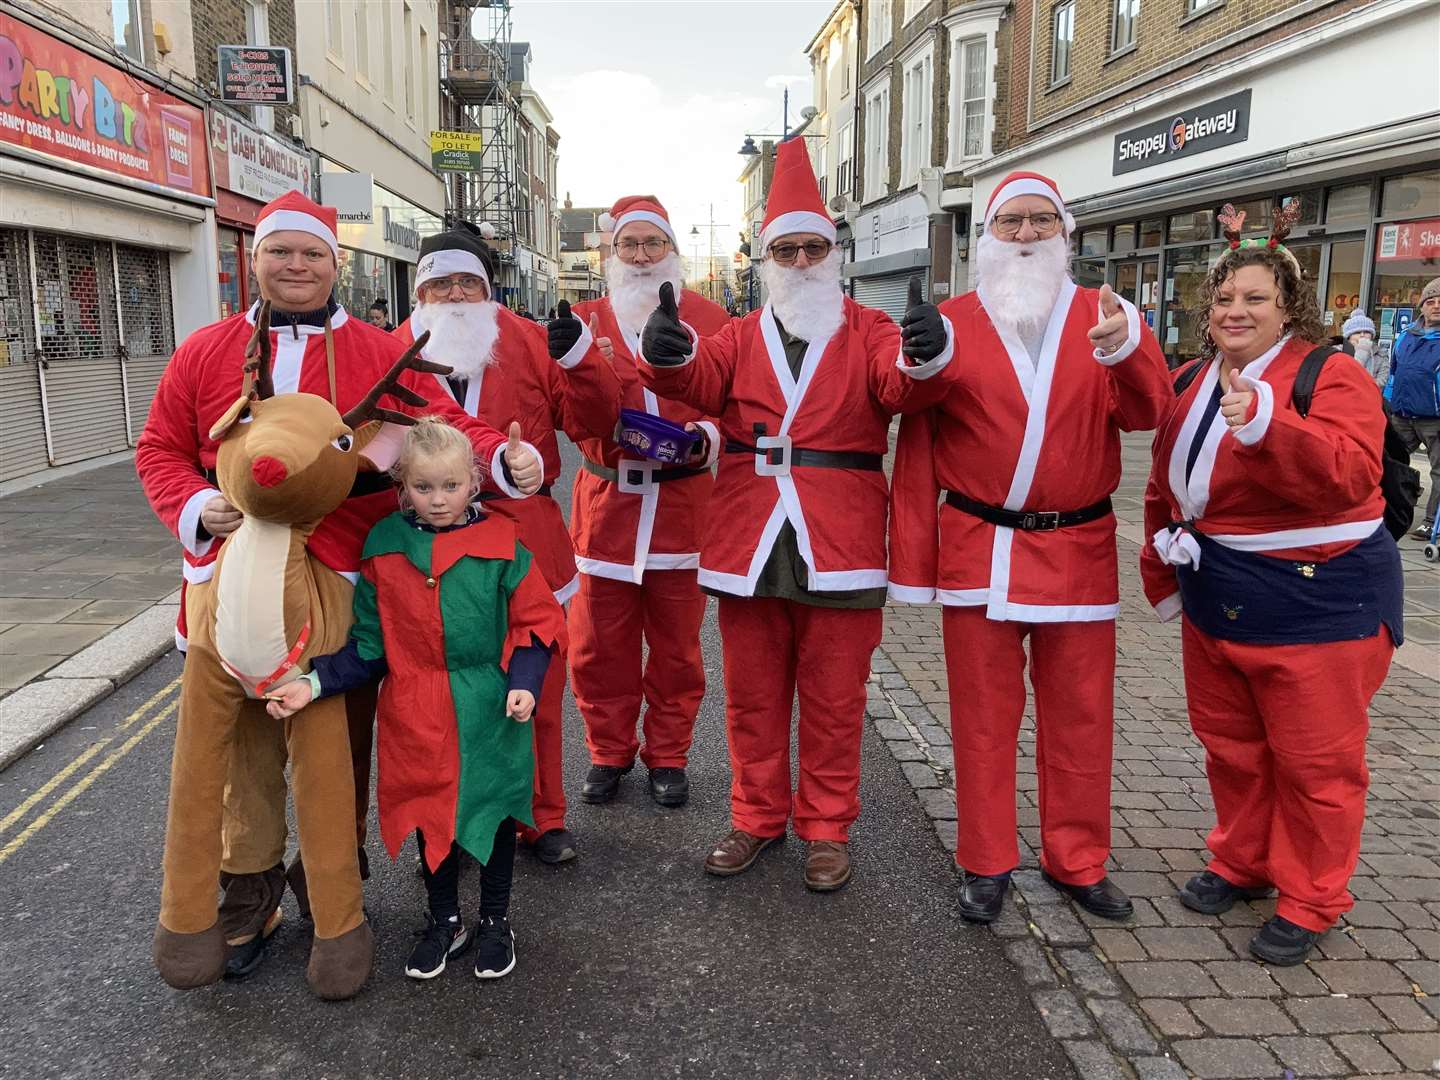 Just some of the many Santas who paraded through Sheerness thanks to Minster-on-Sea Rotary Club